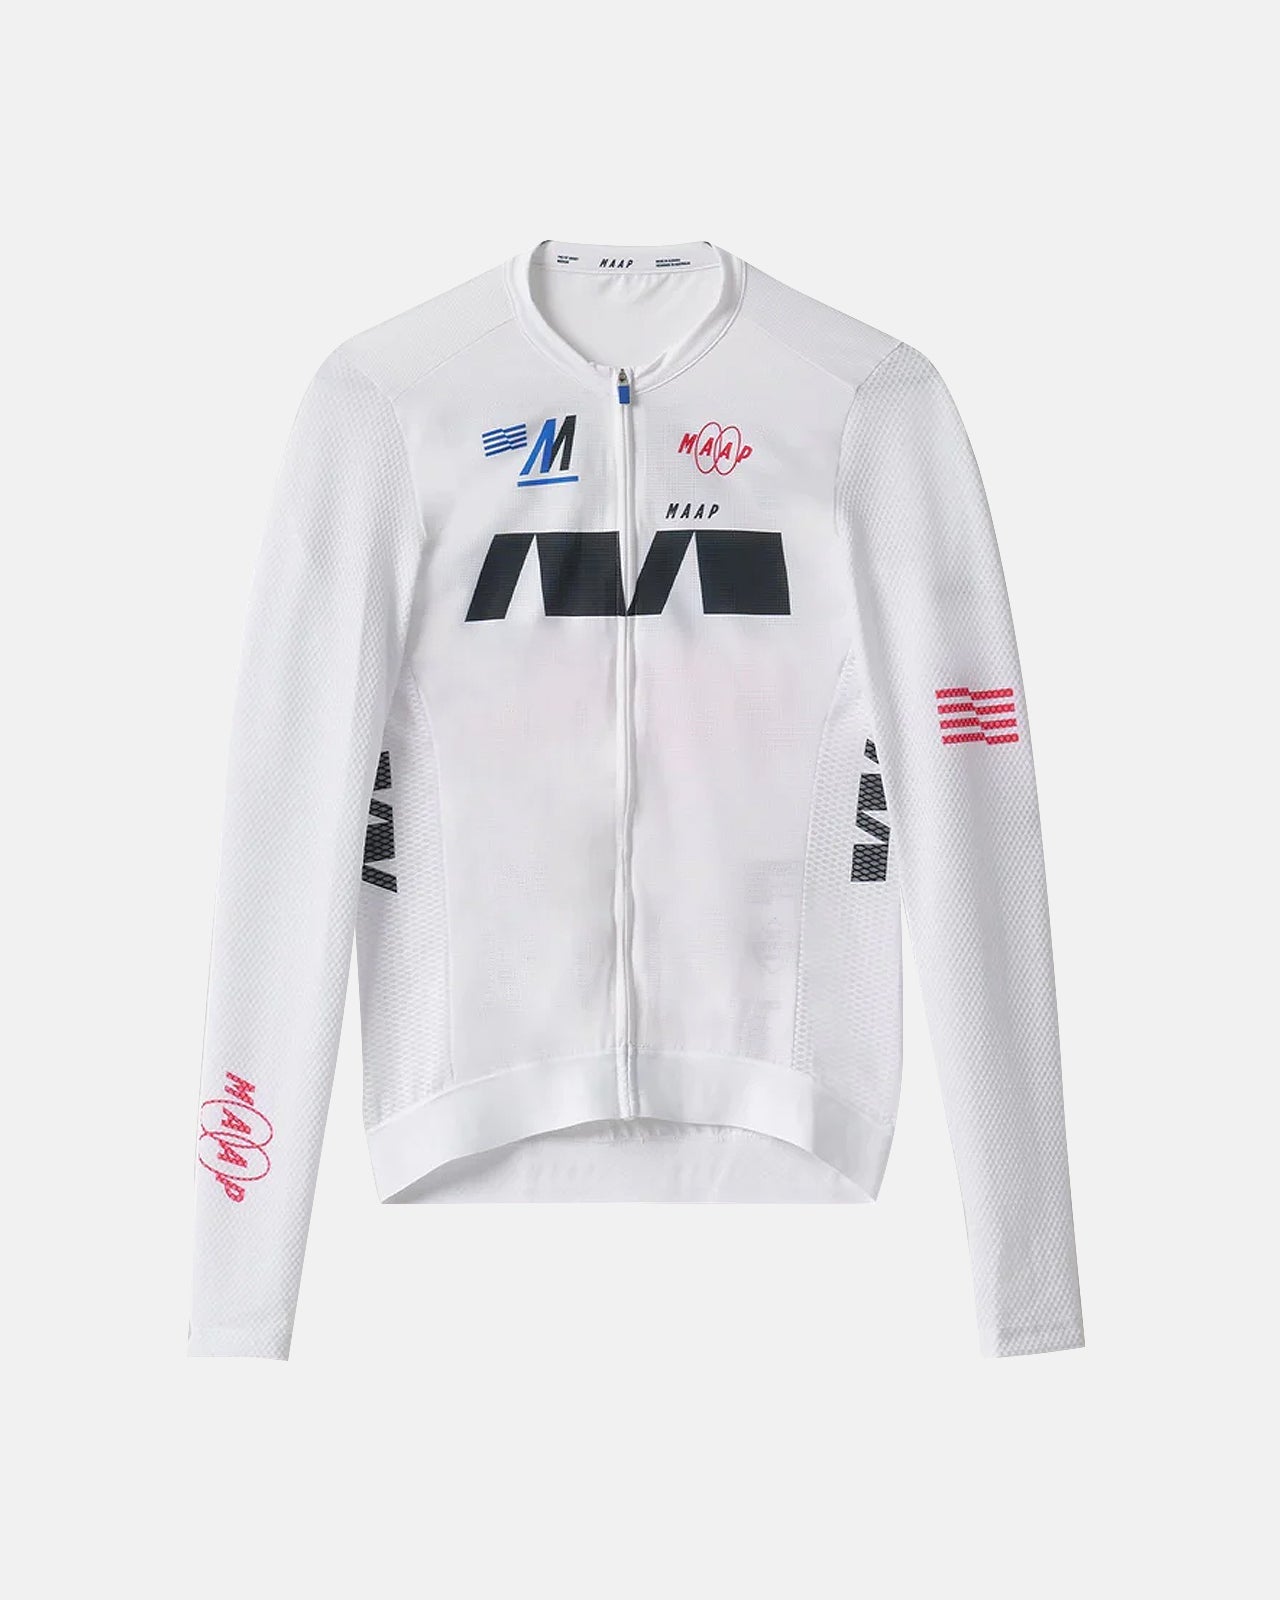 Trace Pro Air LS Jersey - White